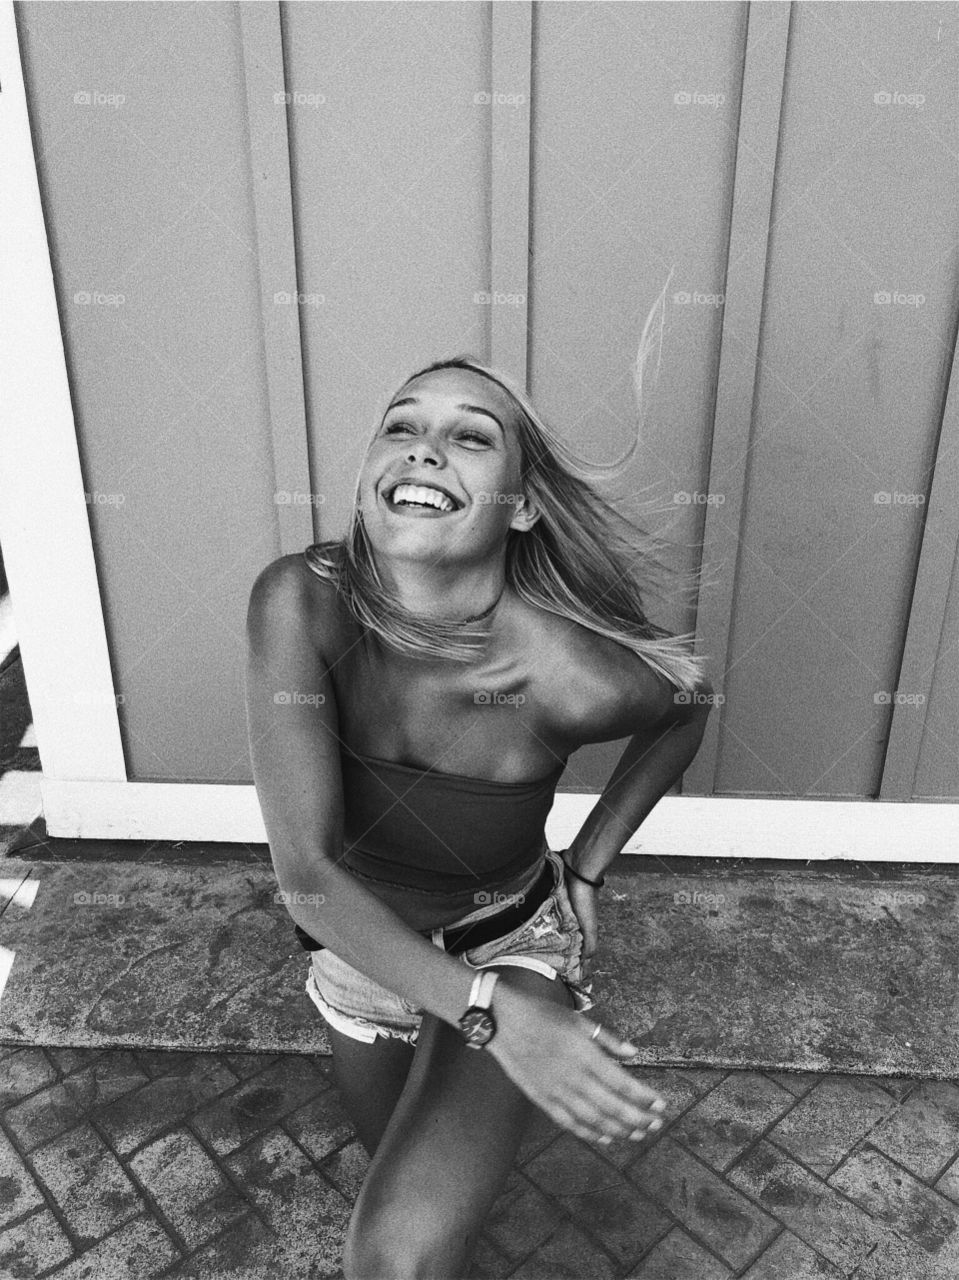 candid happiness is the best kind of photo